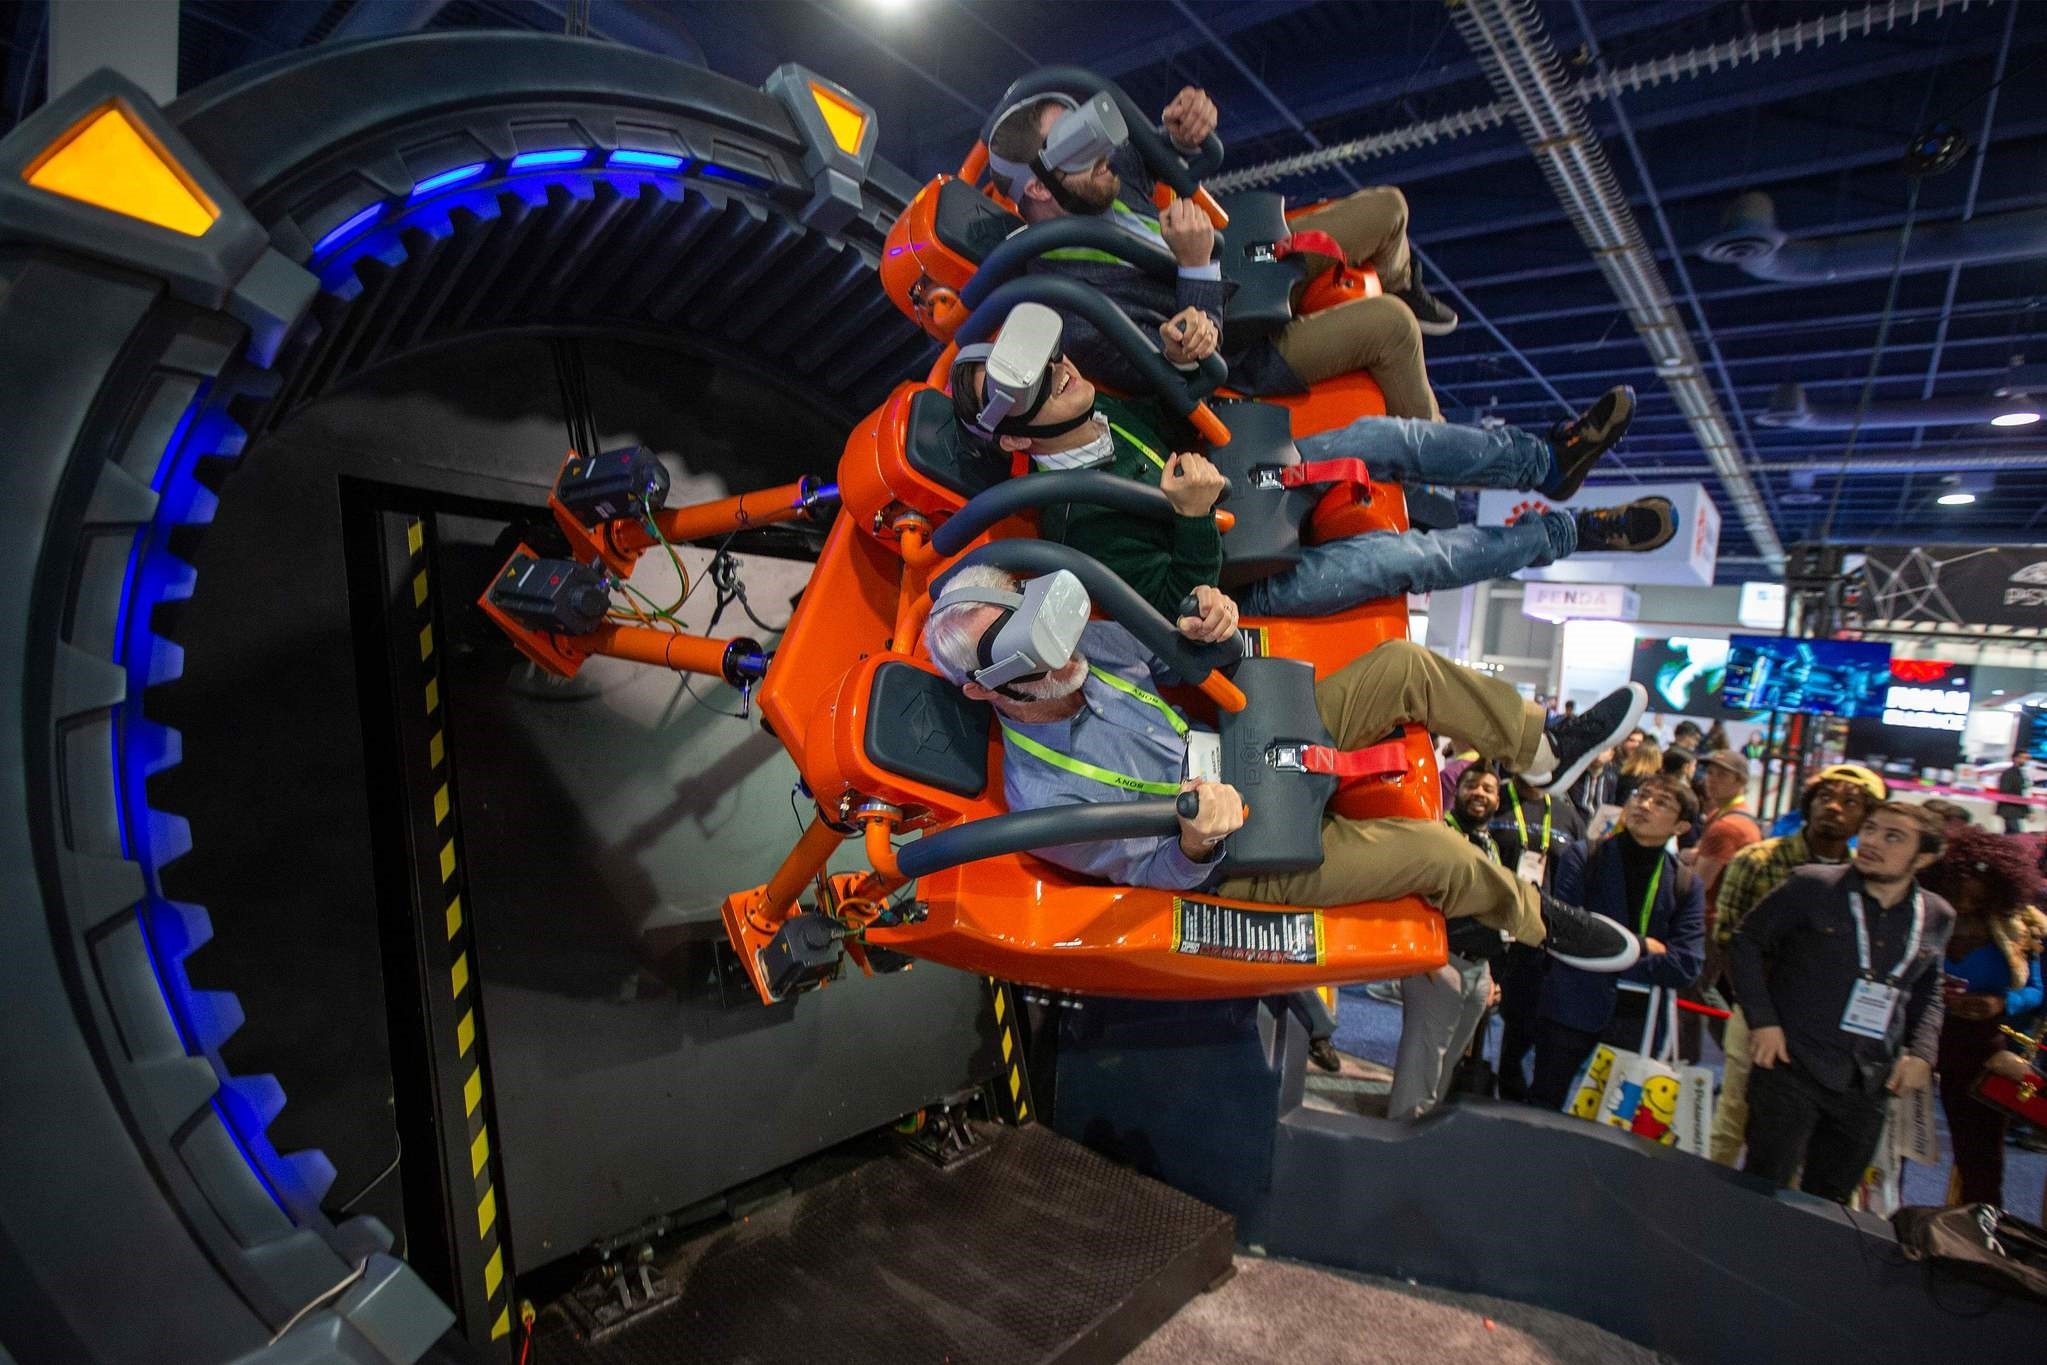 The DOF Robotics Hurricane 360 VR ride is shown at the Las Vegas Convention Center during CES 2019 in Las Vegas on Jan. 10.